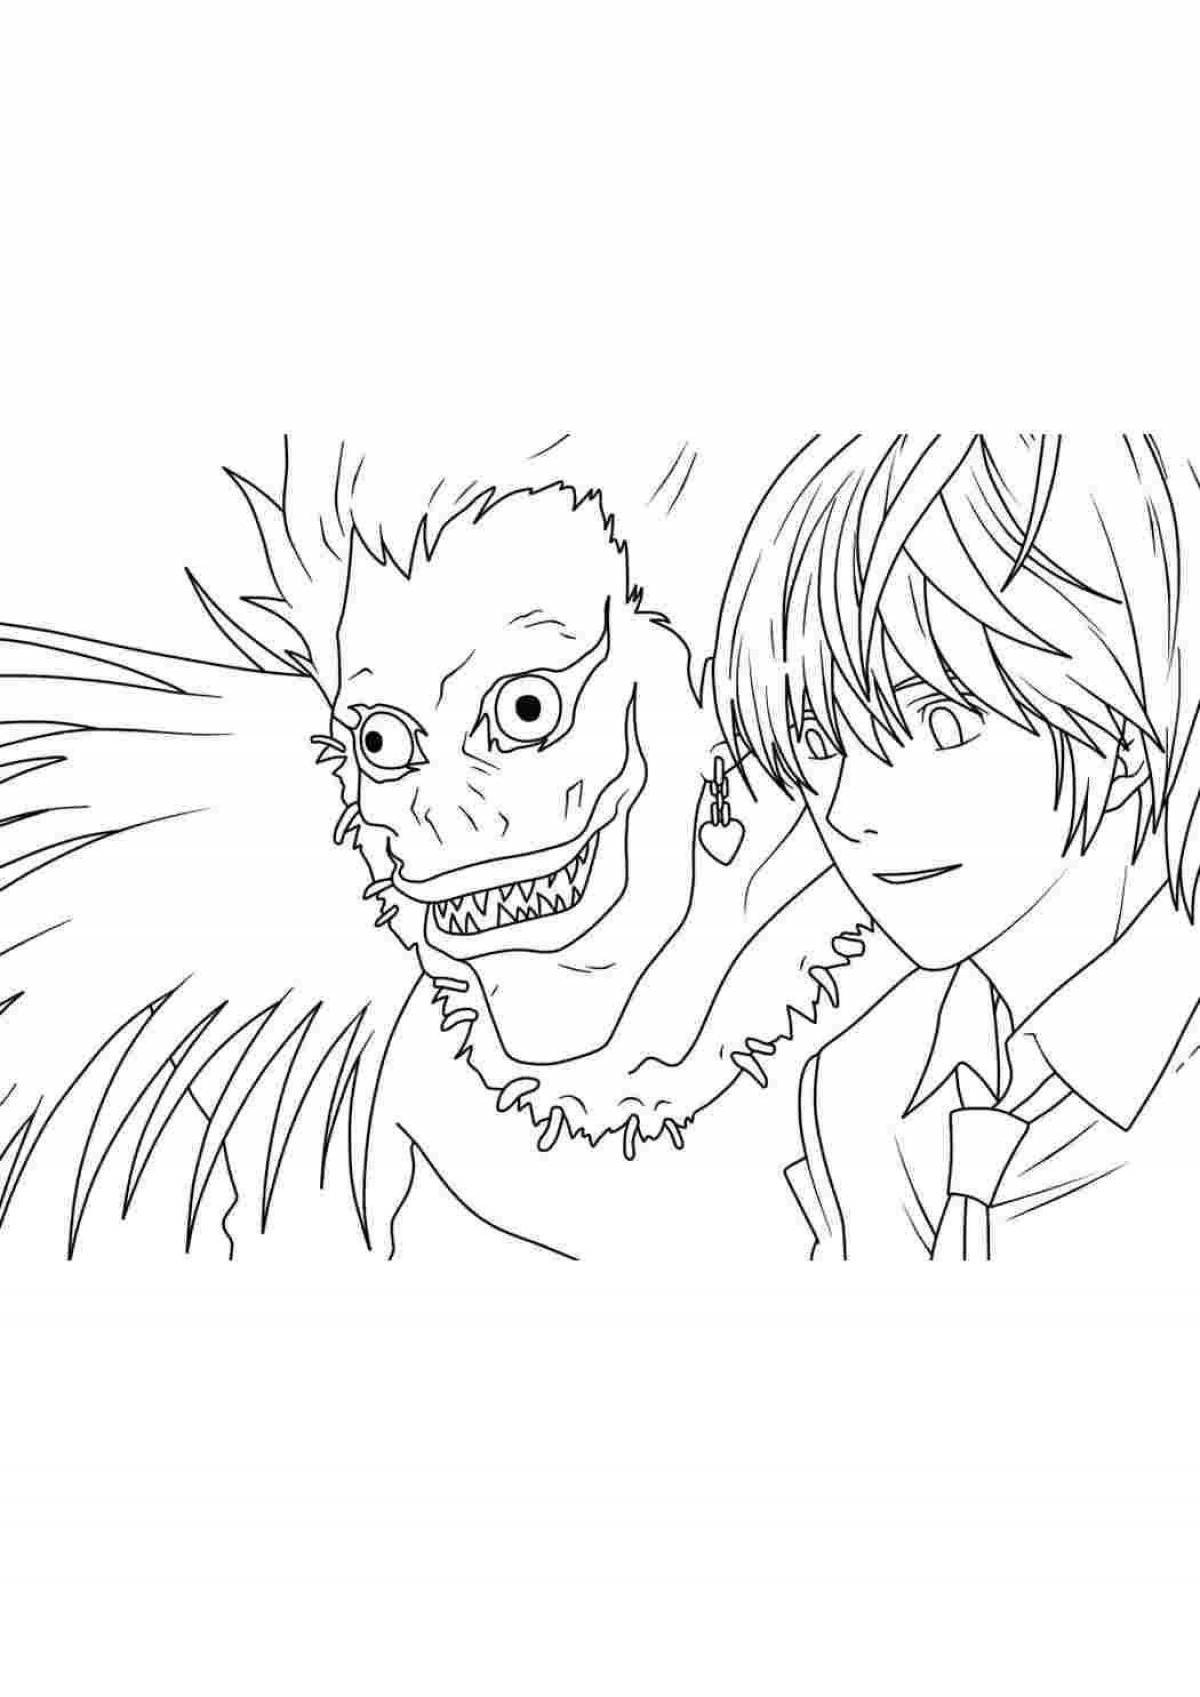 Light yagami coloring page